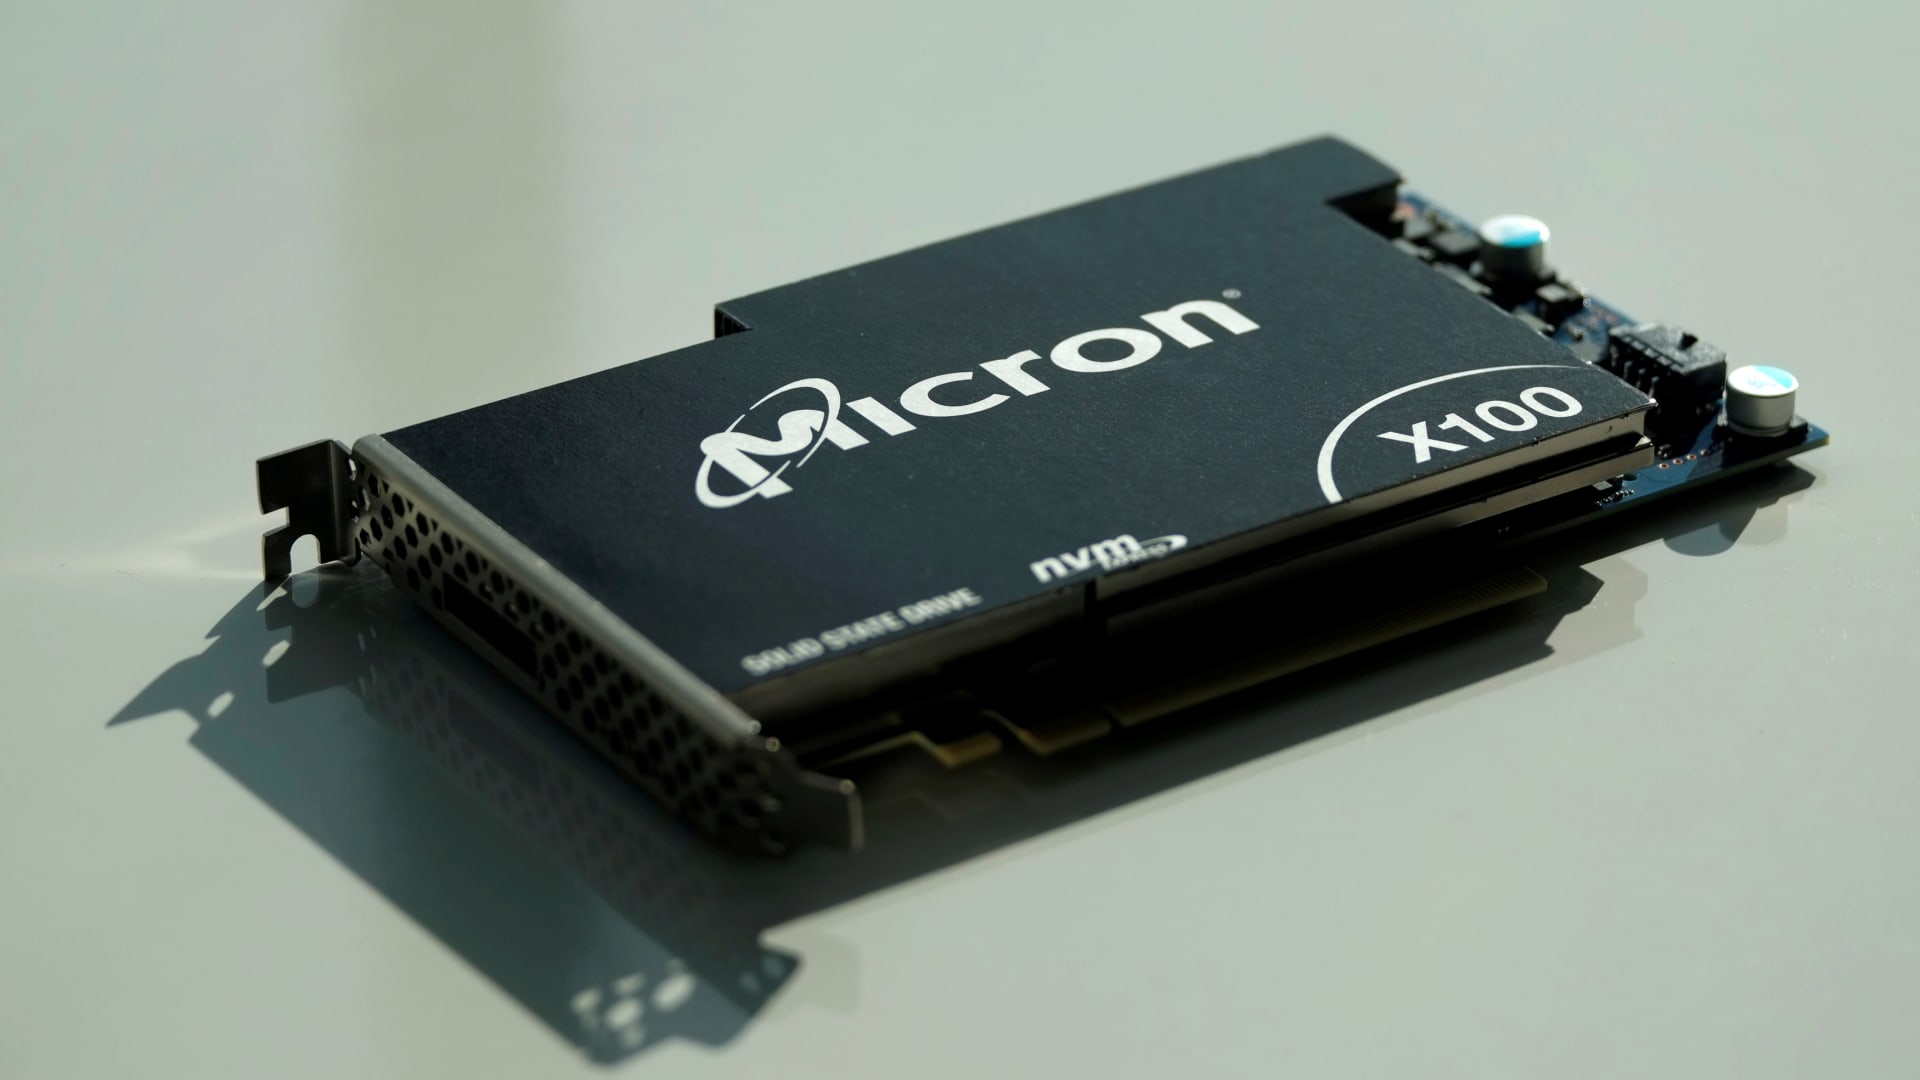 Micron Technology's solid-state drive for data center customers is presented at a product launch event in San Francisco on Oct. 24, 2019.